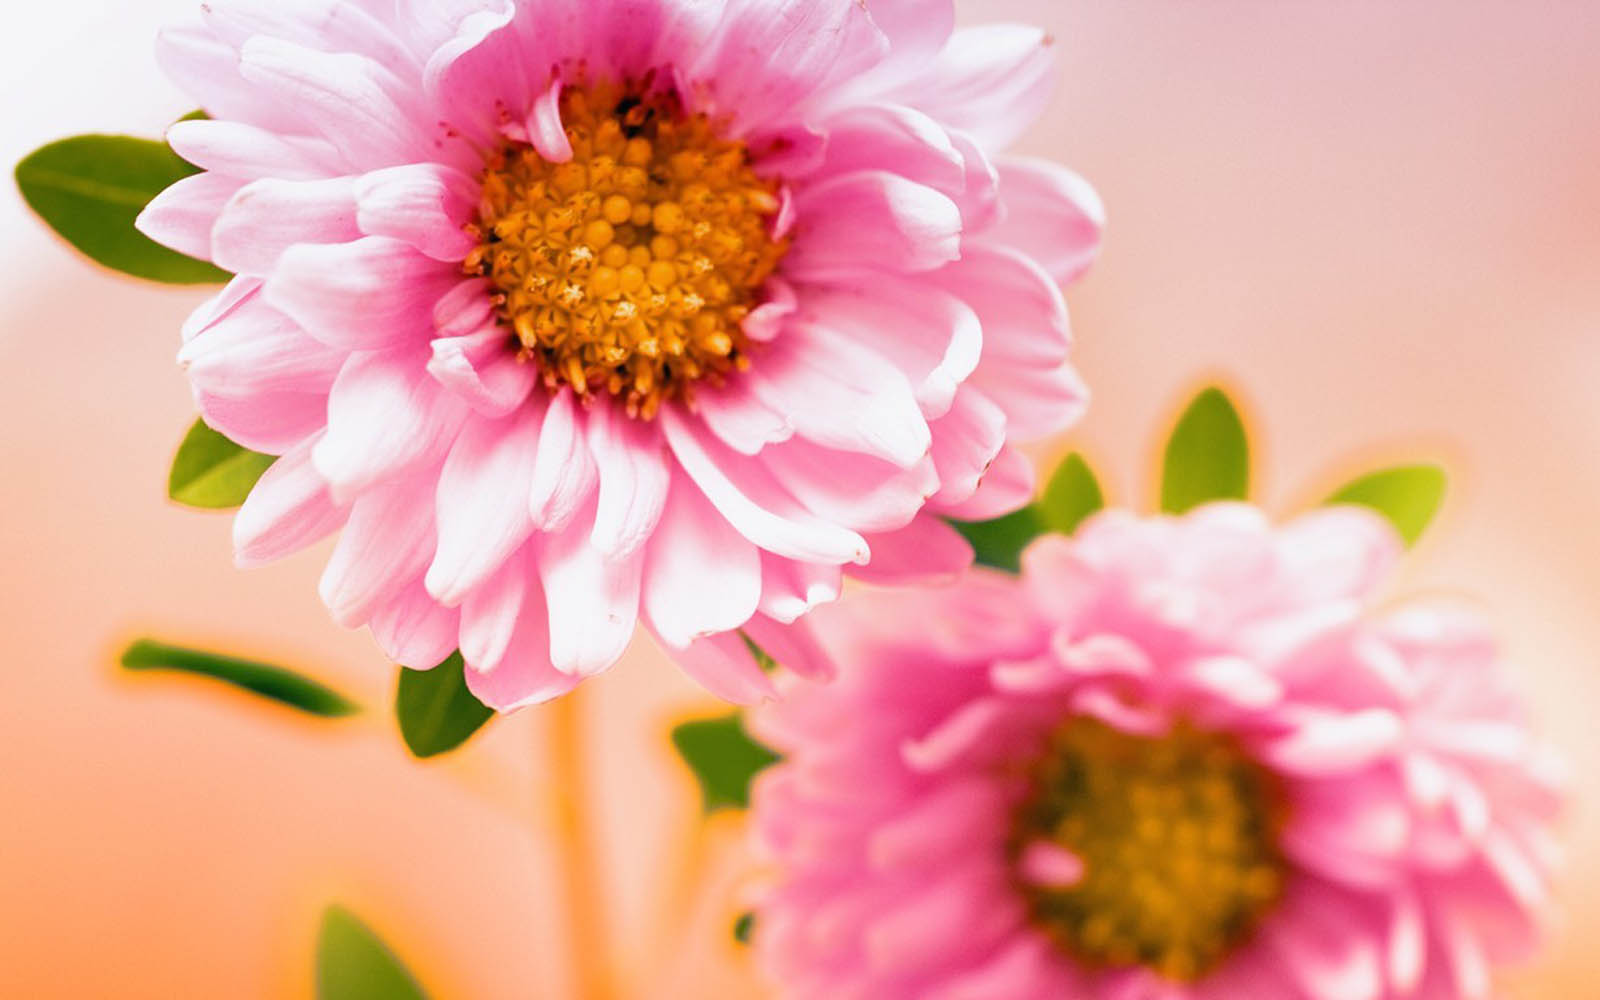  wallpapers  Pink Flowers Wallpapers 